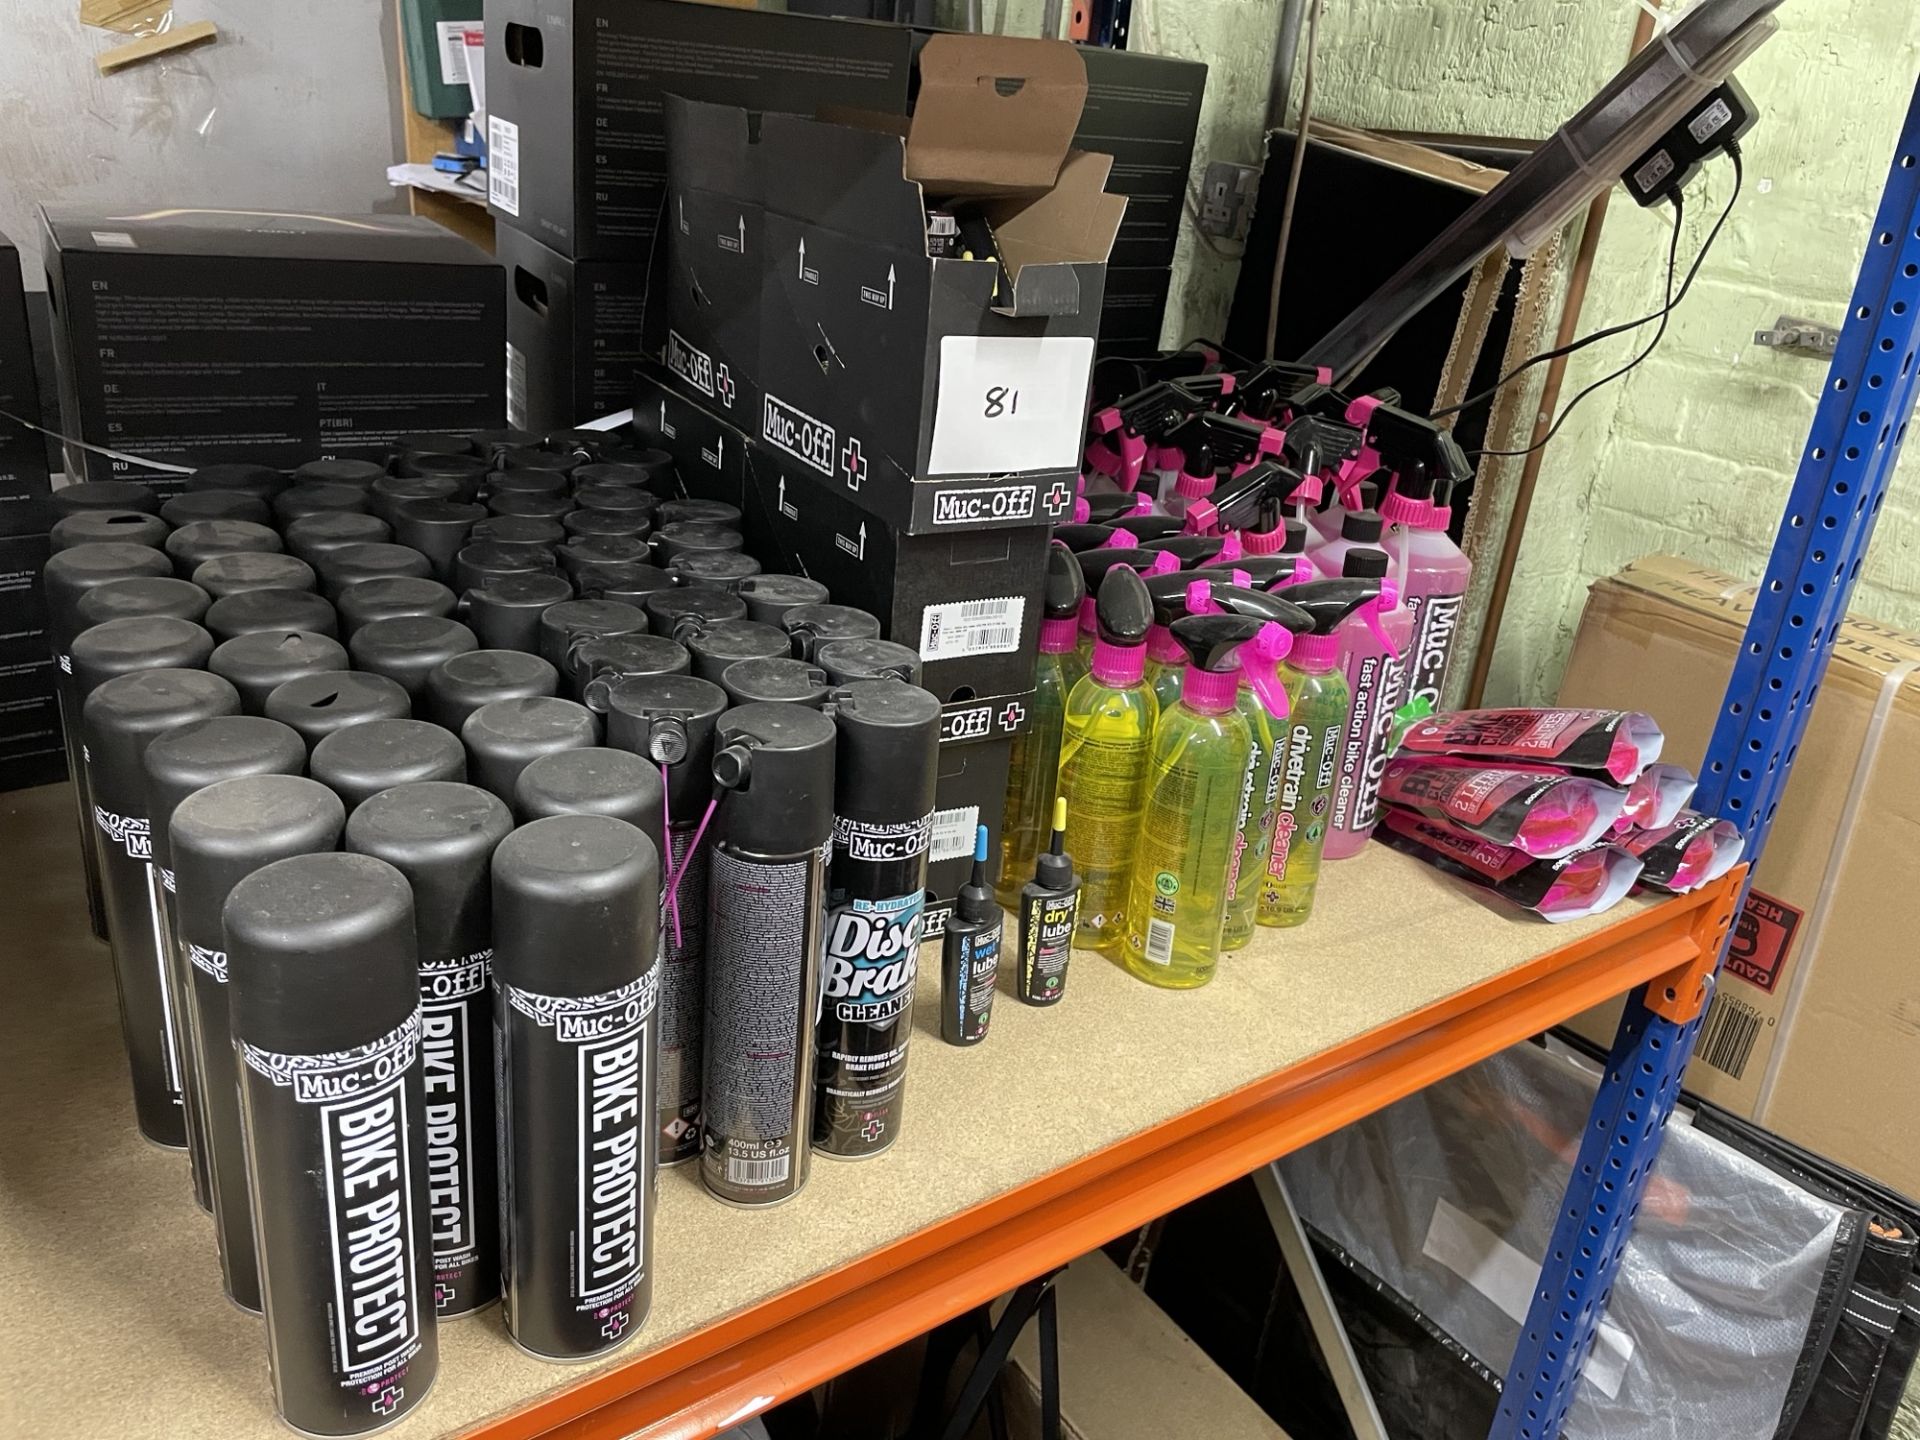 Large Quantity of Muck Off Bike Cleaner and Lubricants As Lotted